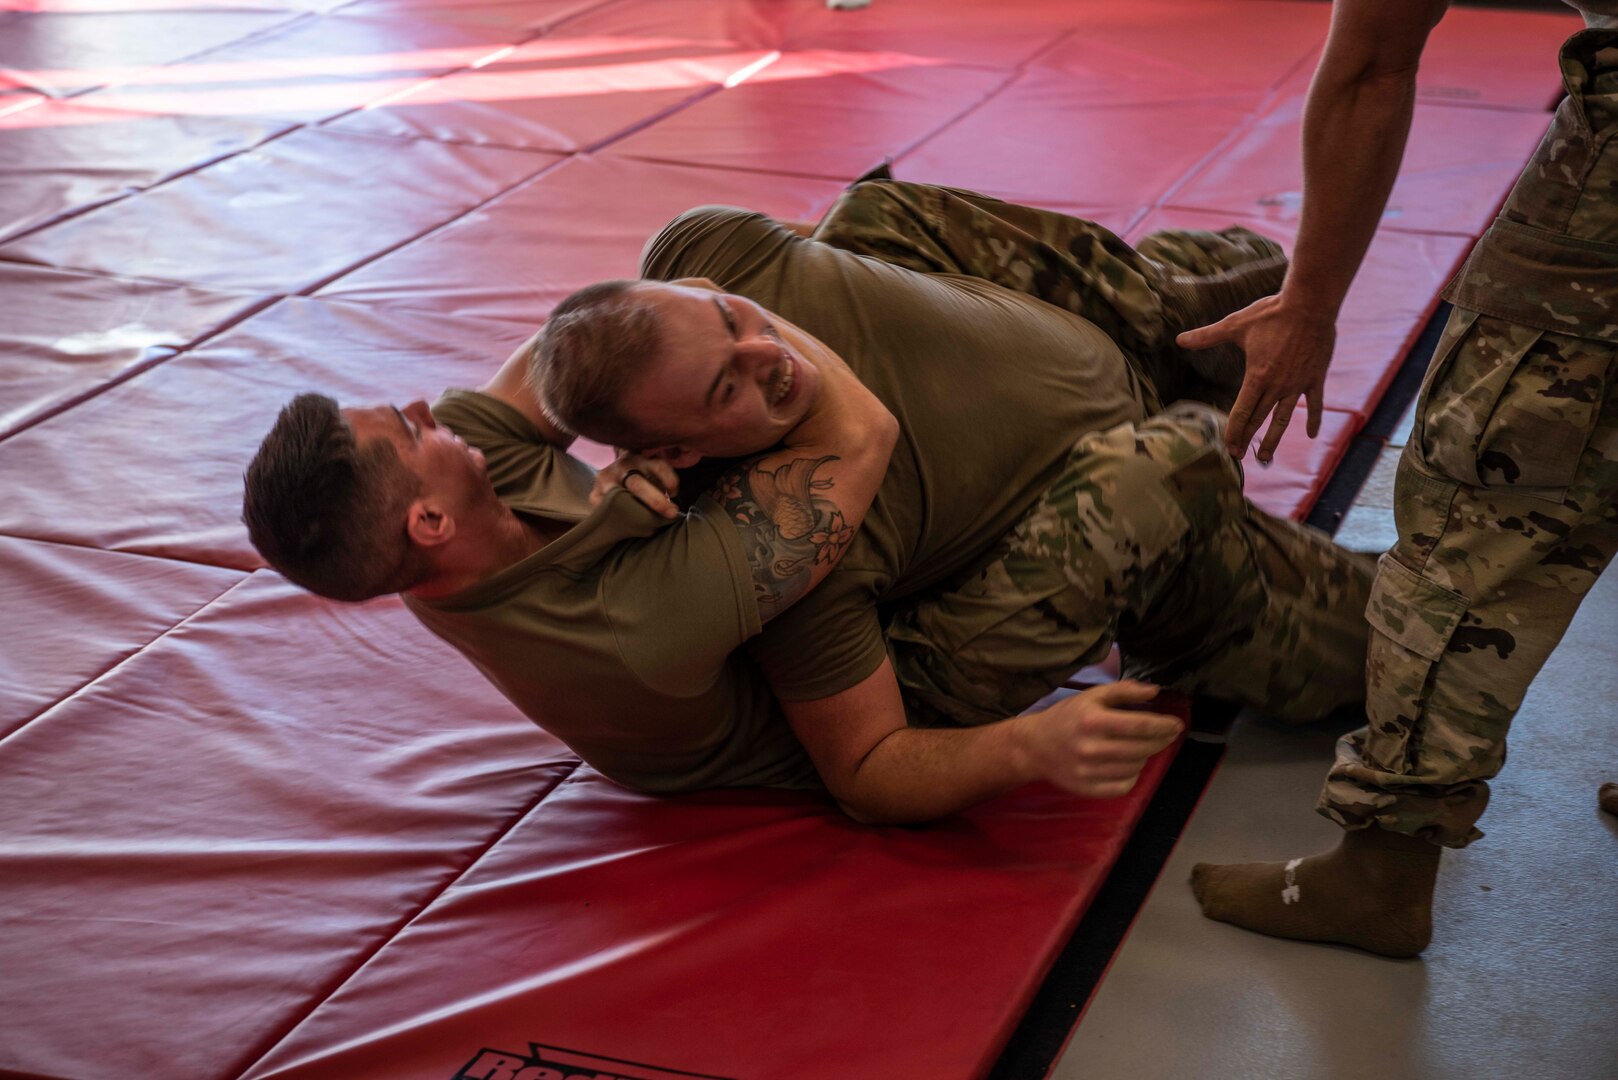 Members of the 128th Air Refueling Wing Security Forces Squadron practice combatives as part of augmentee training Nov. 9 at the Wisconsin Air National Guard base in Milwaukee. The augmentee training program, an essential component of the squadron's operations, prepares selected members to step into specialized roles during periods of heightened security or crisis. 128th Air Refueling Wing photo by Master Sgt. Kellen Kroening